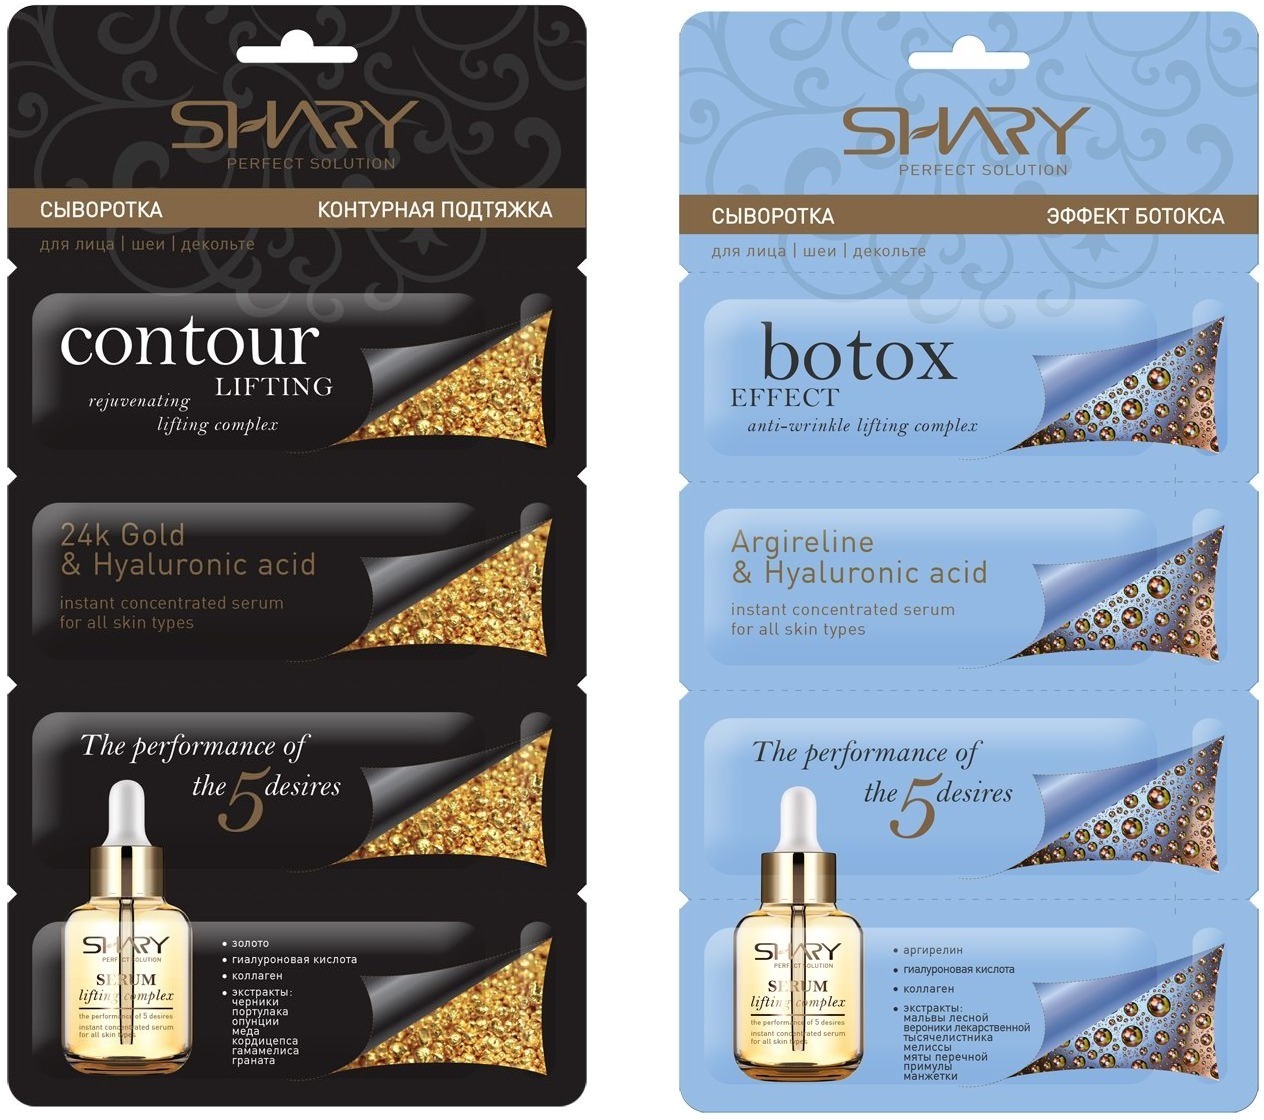 Shary Perfect Solution Face And Decollete Serum